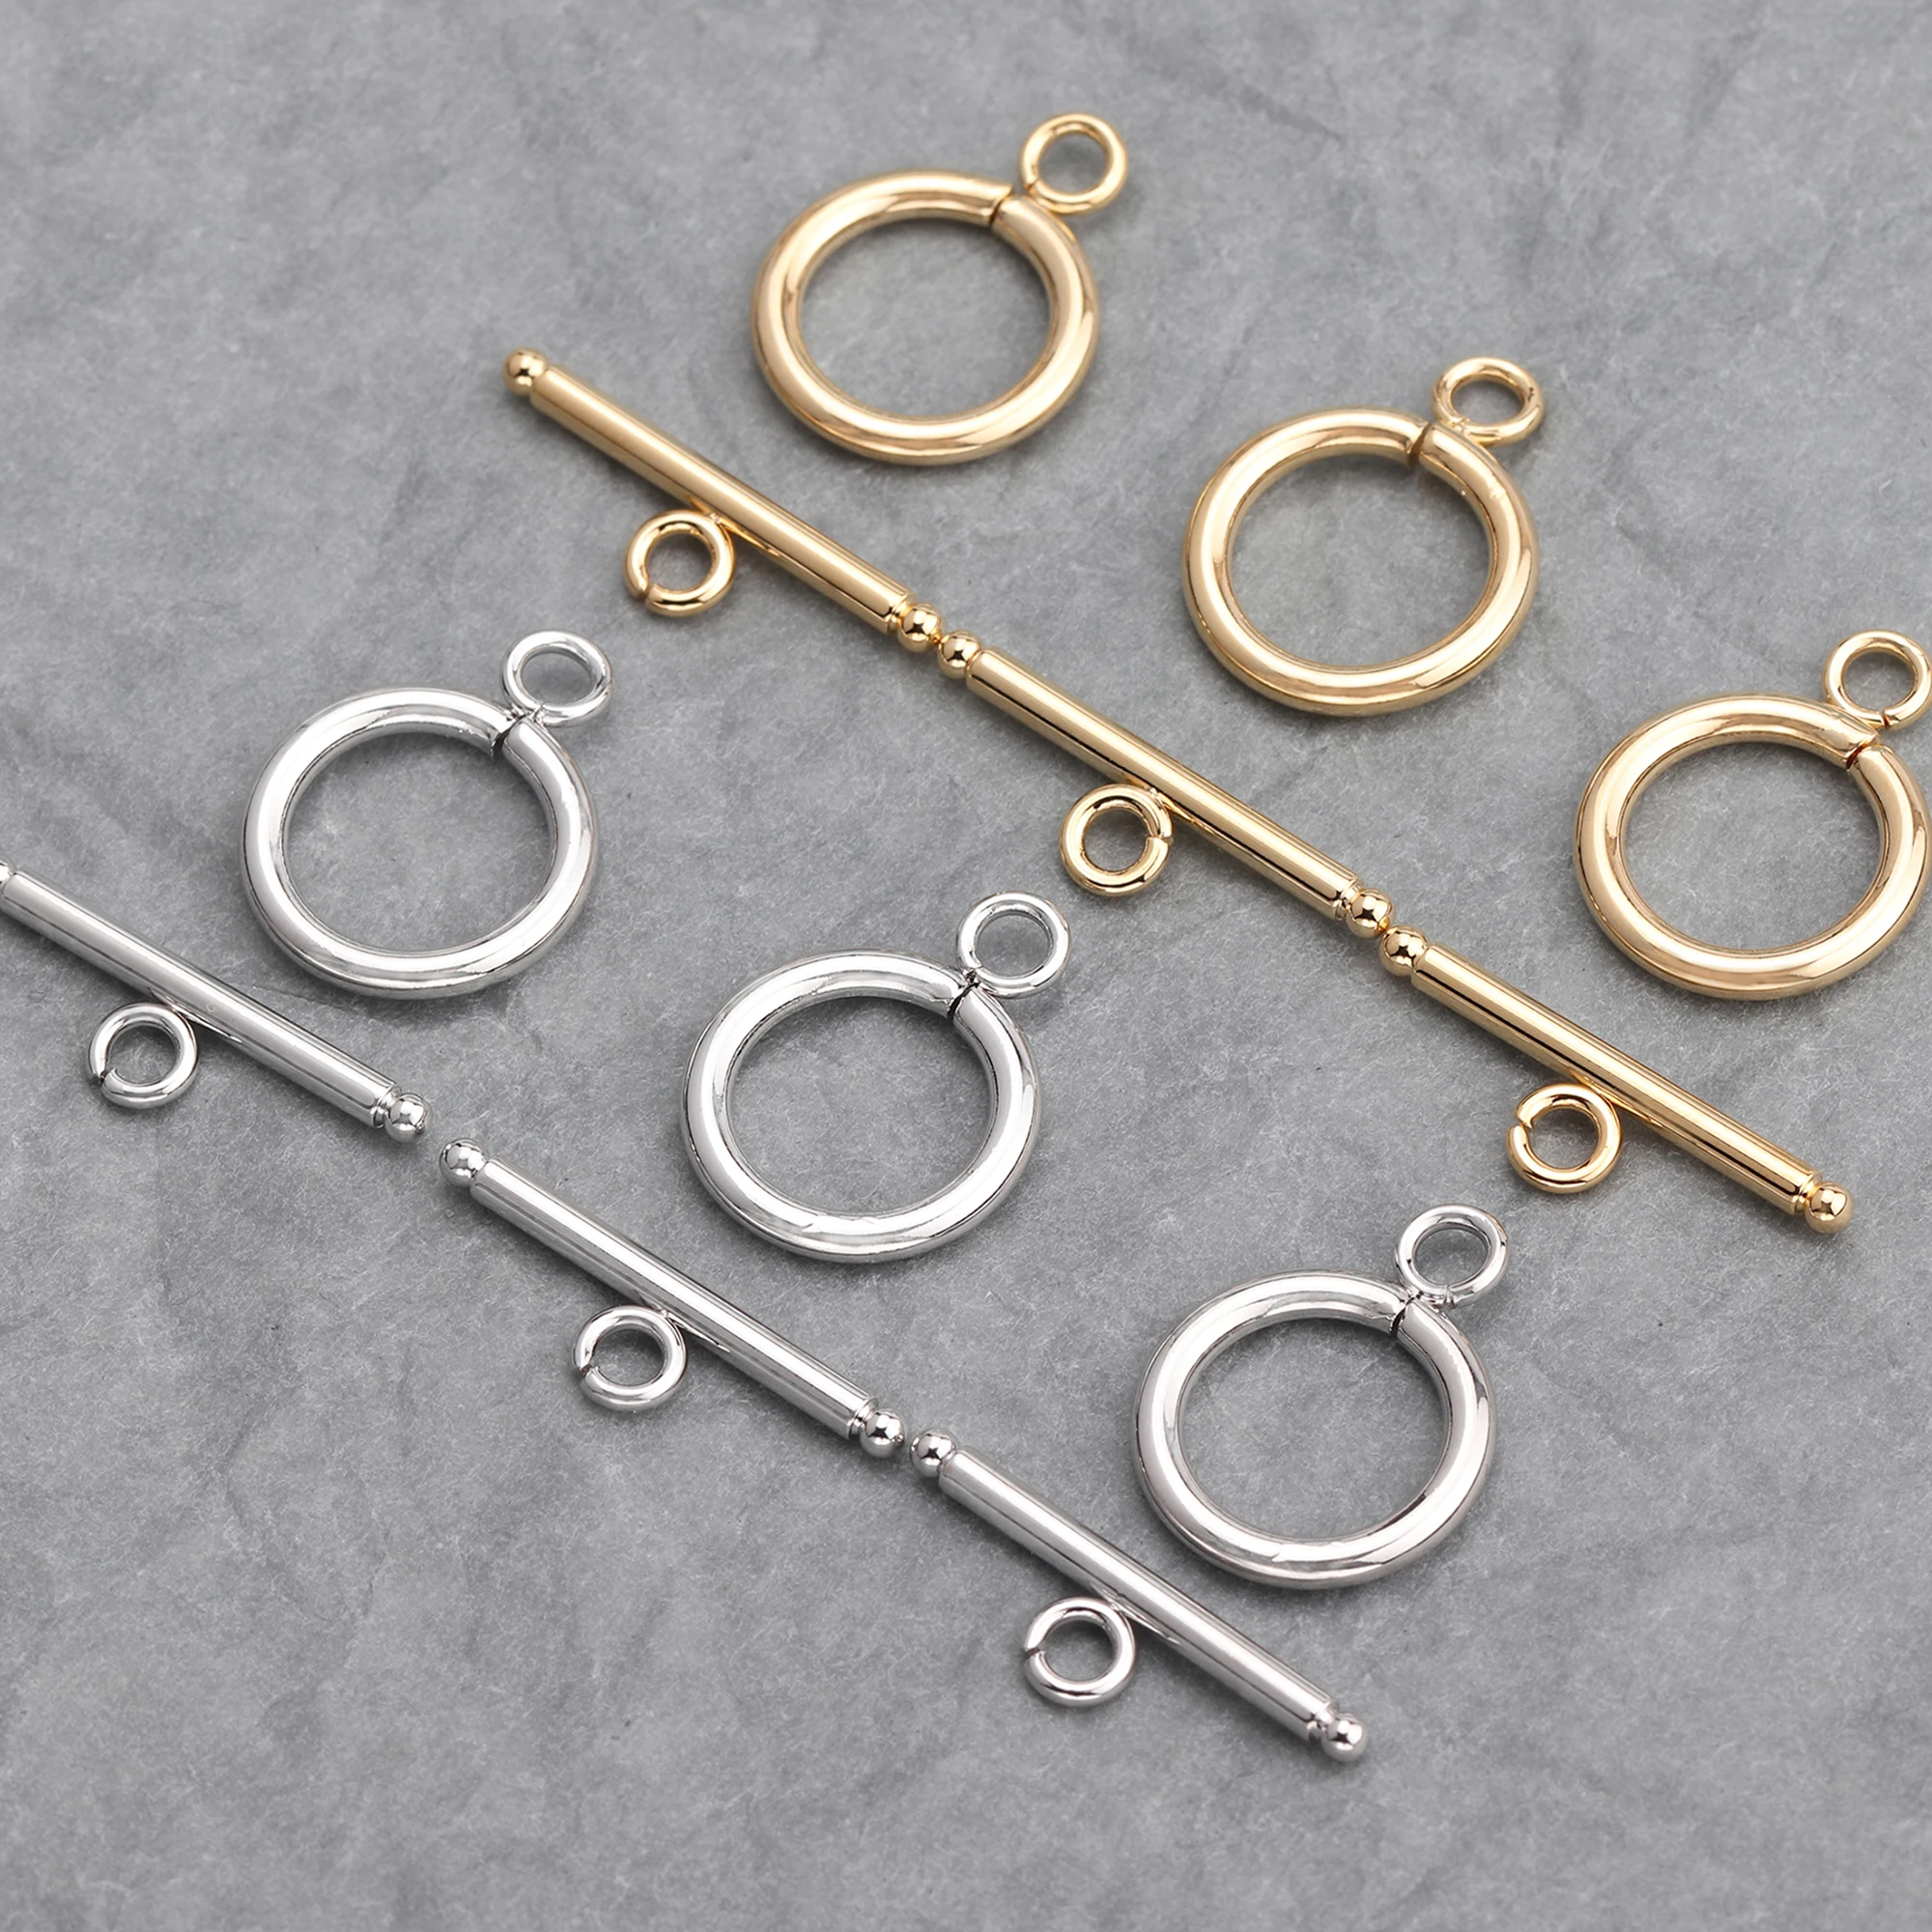 

Wholesale Stainless Steel Toggle Clasp Diy Bracelet Necklace Connector Jewelry Making Accessories M604 6pairs/lot, Gold,silver